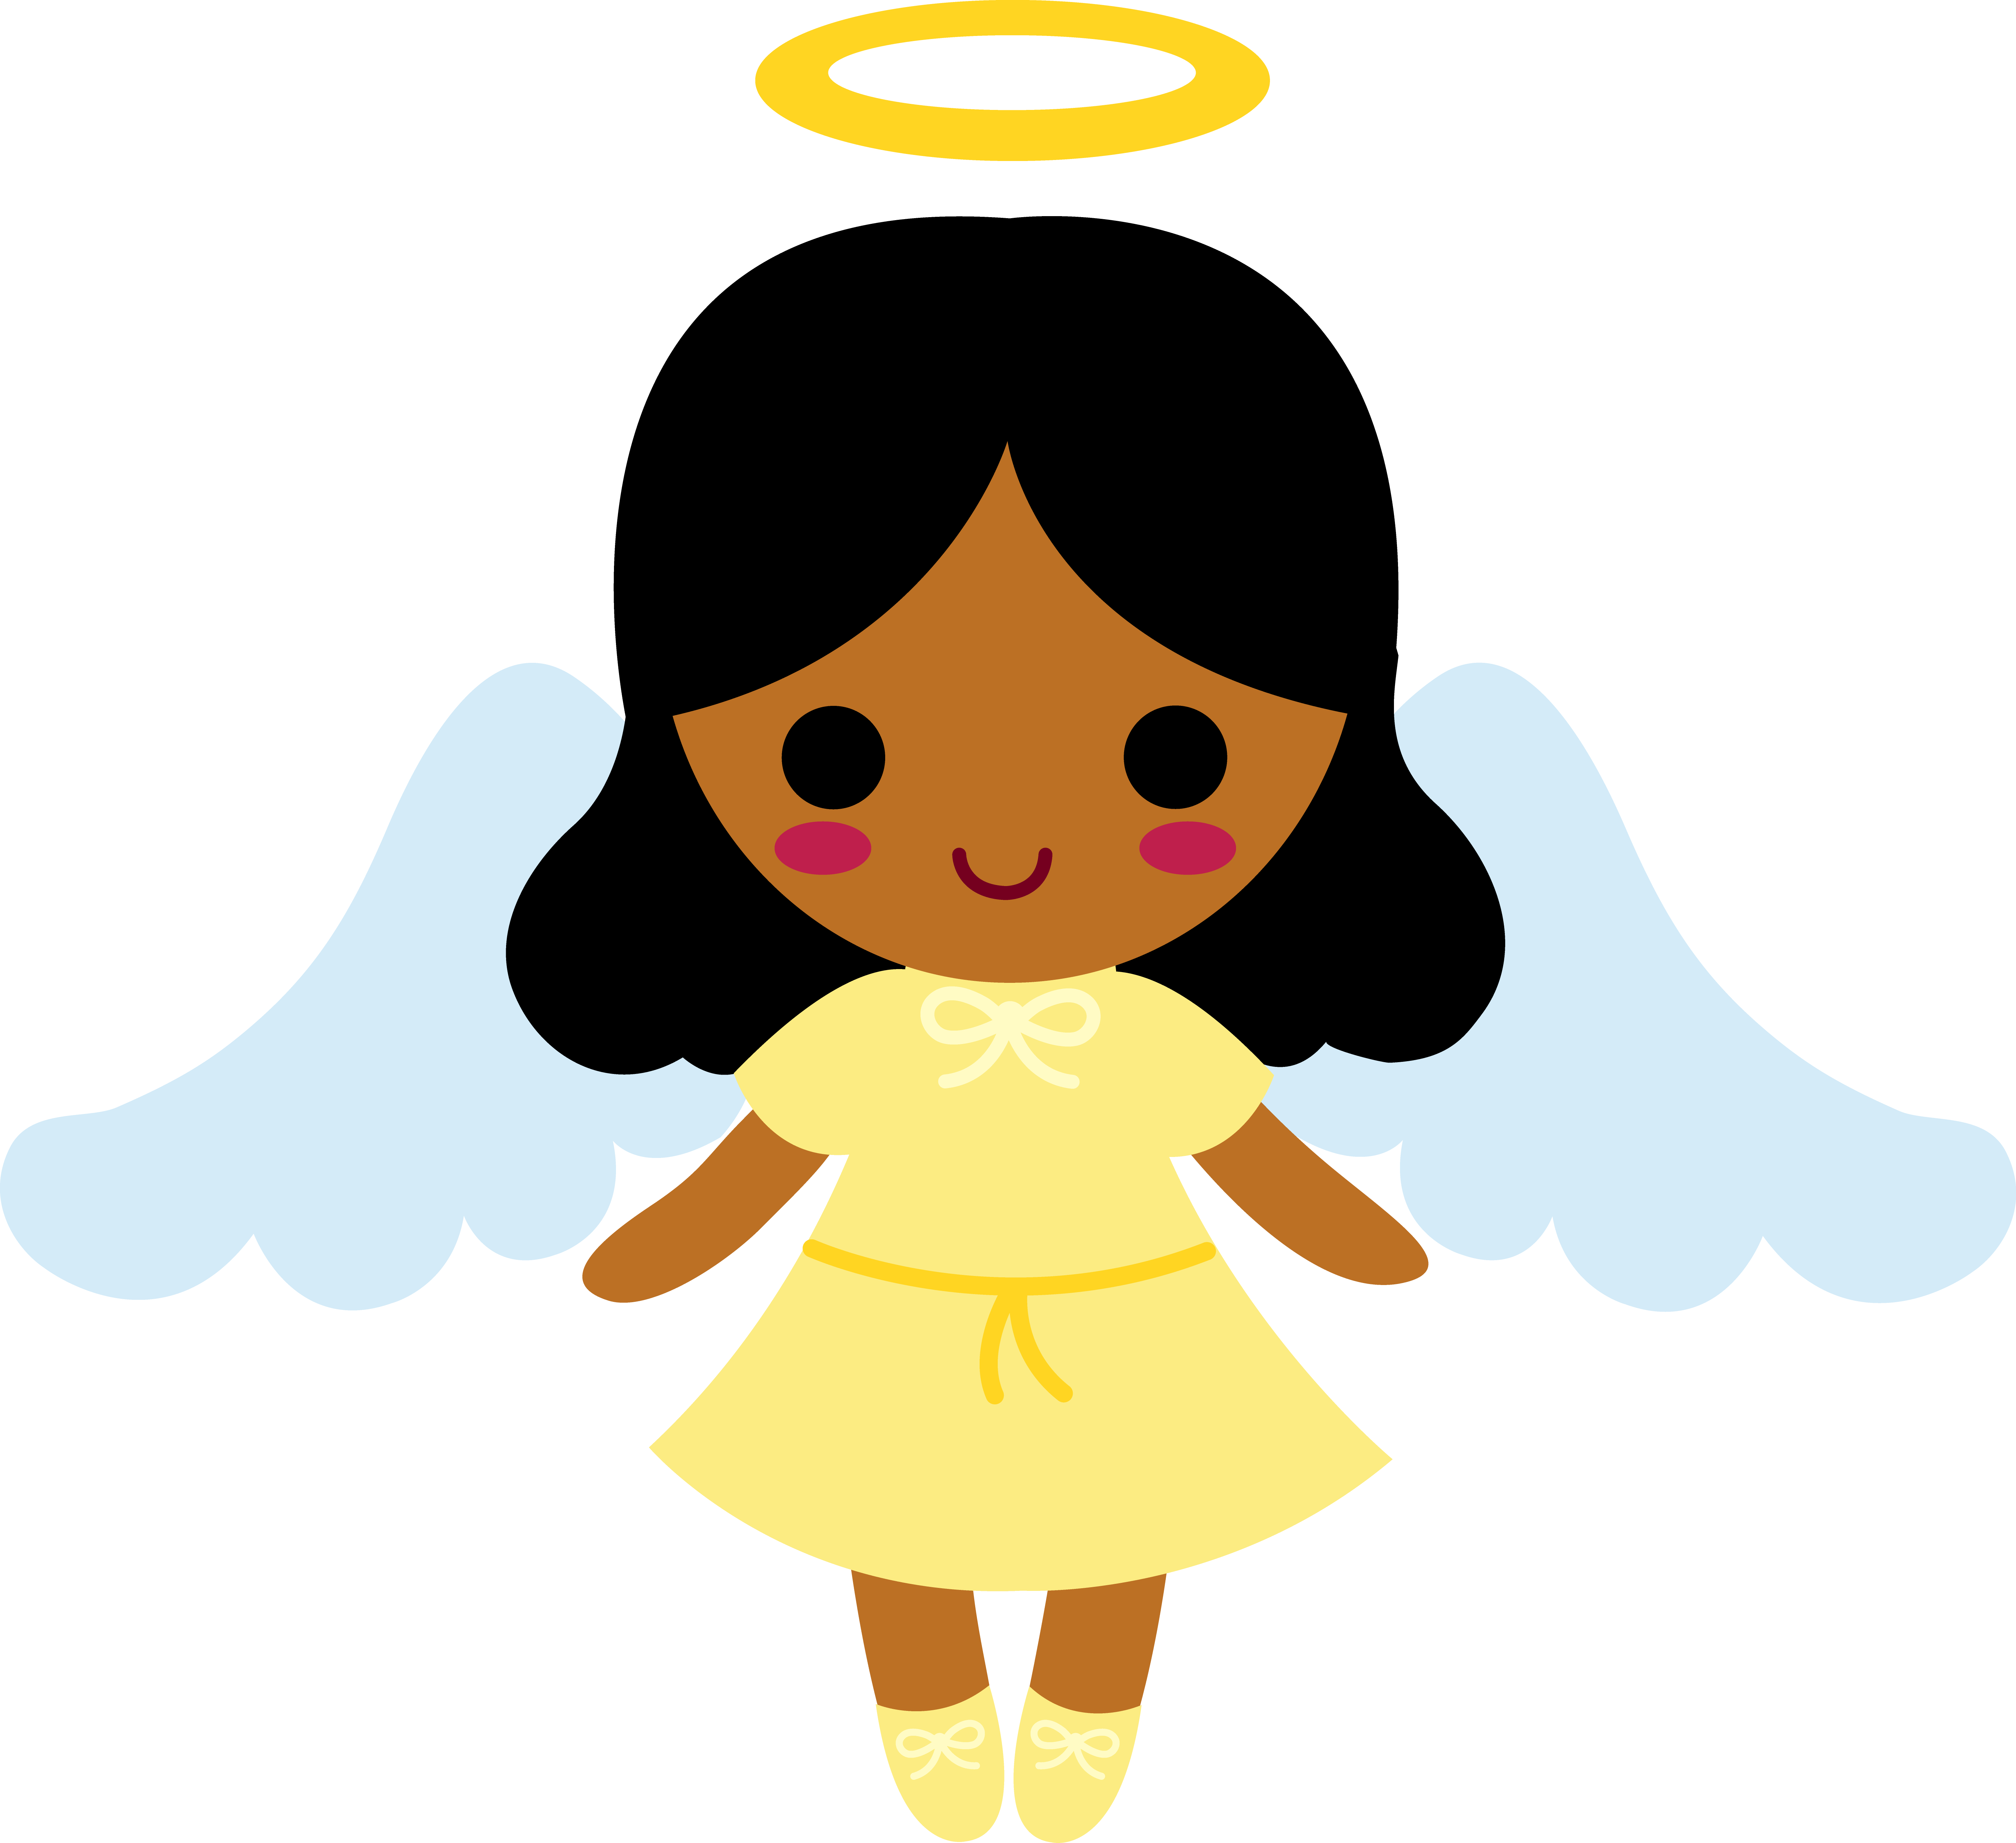 Black Baby Angel Pictures Clipart Best